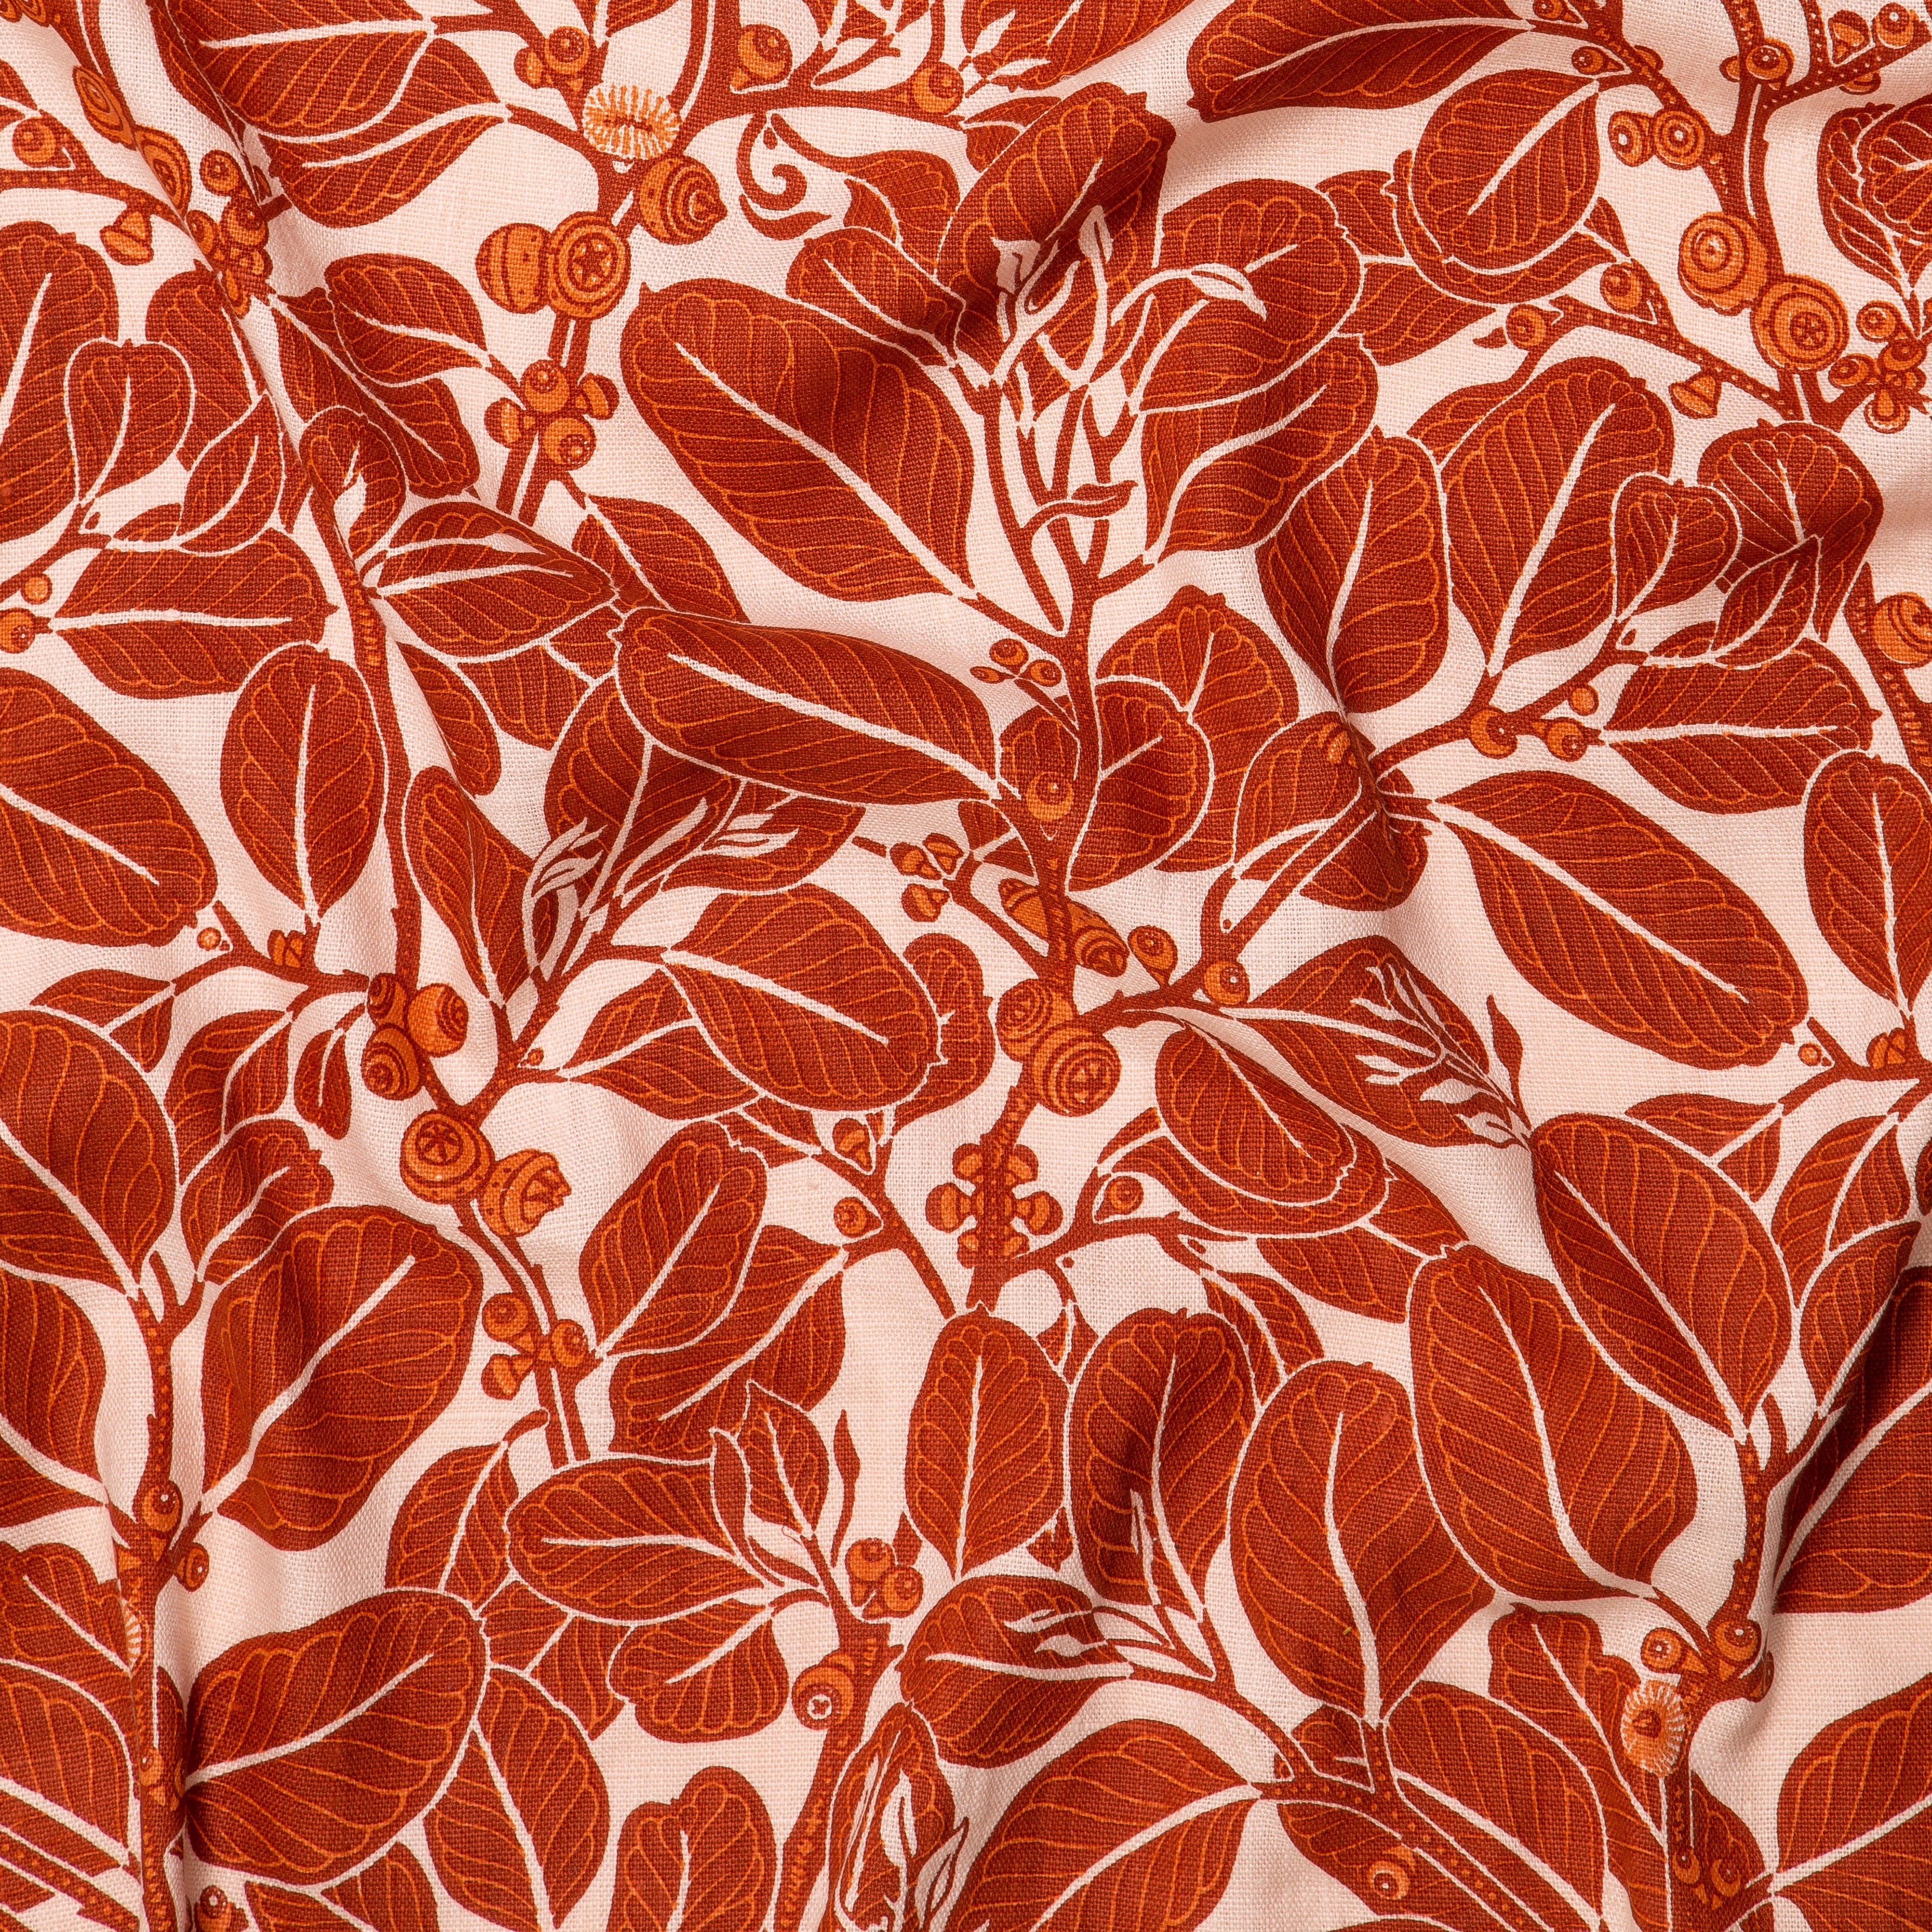 Draped fabric in a dense leaf and stem print in red and orange on a cream field.